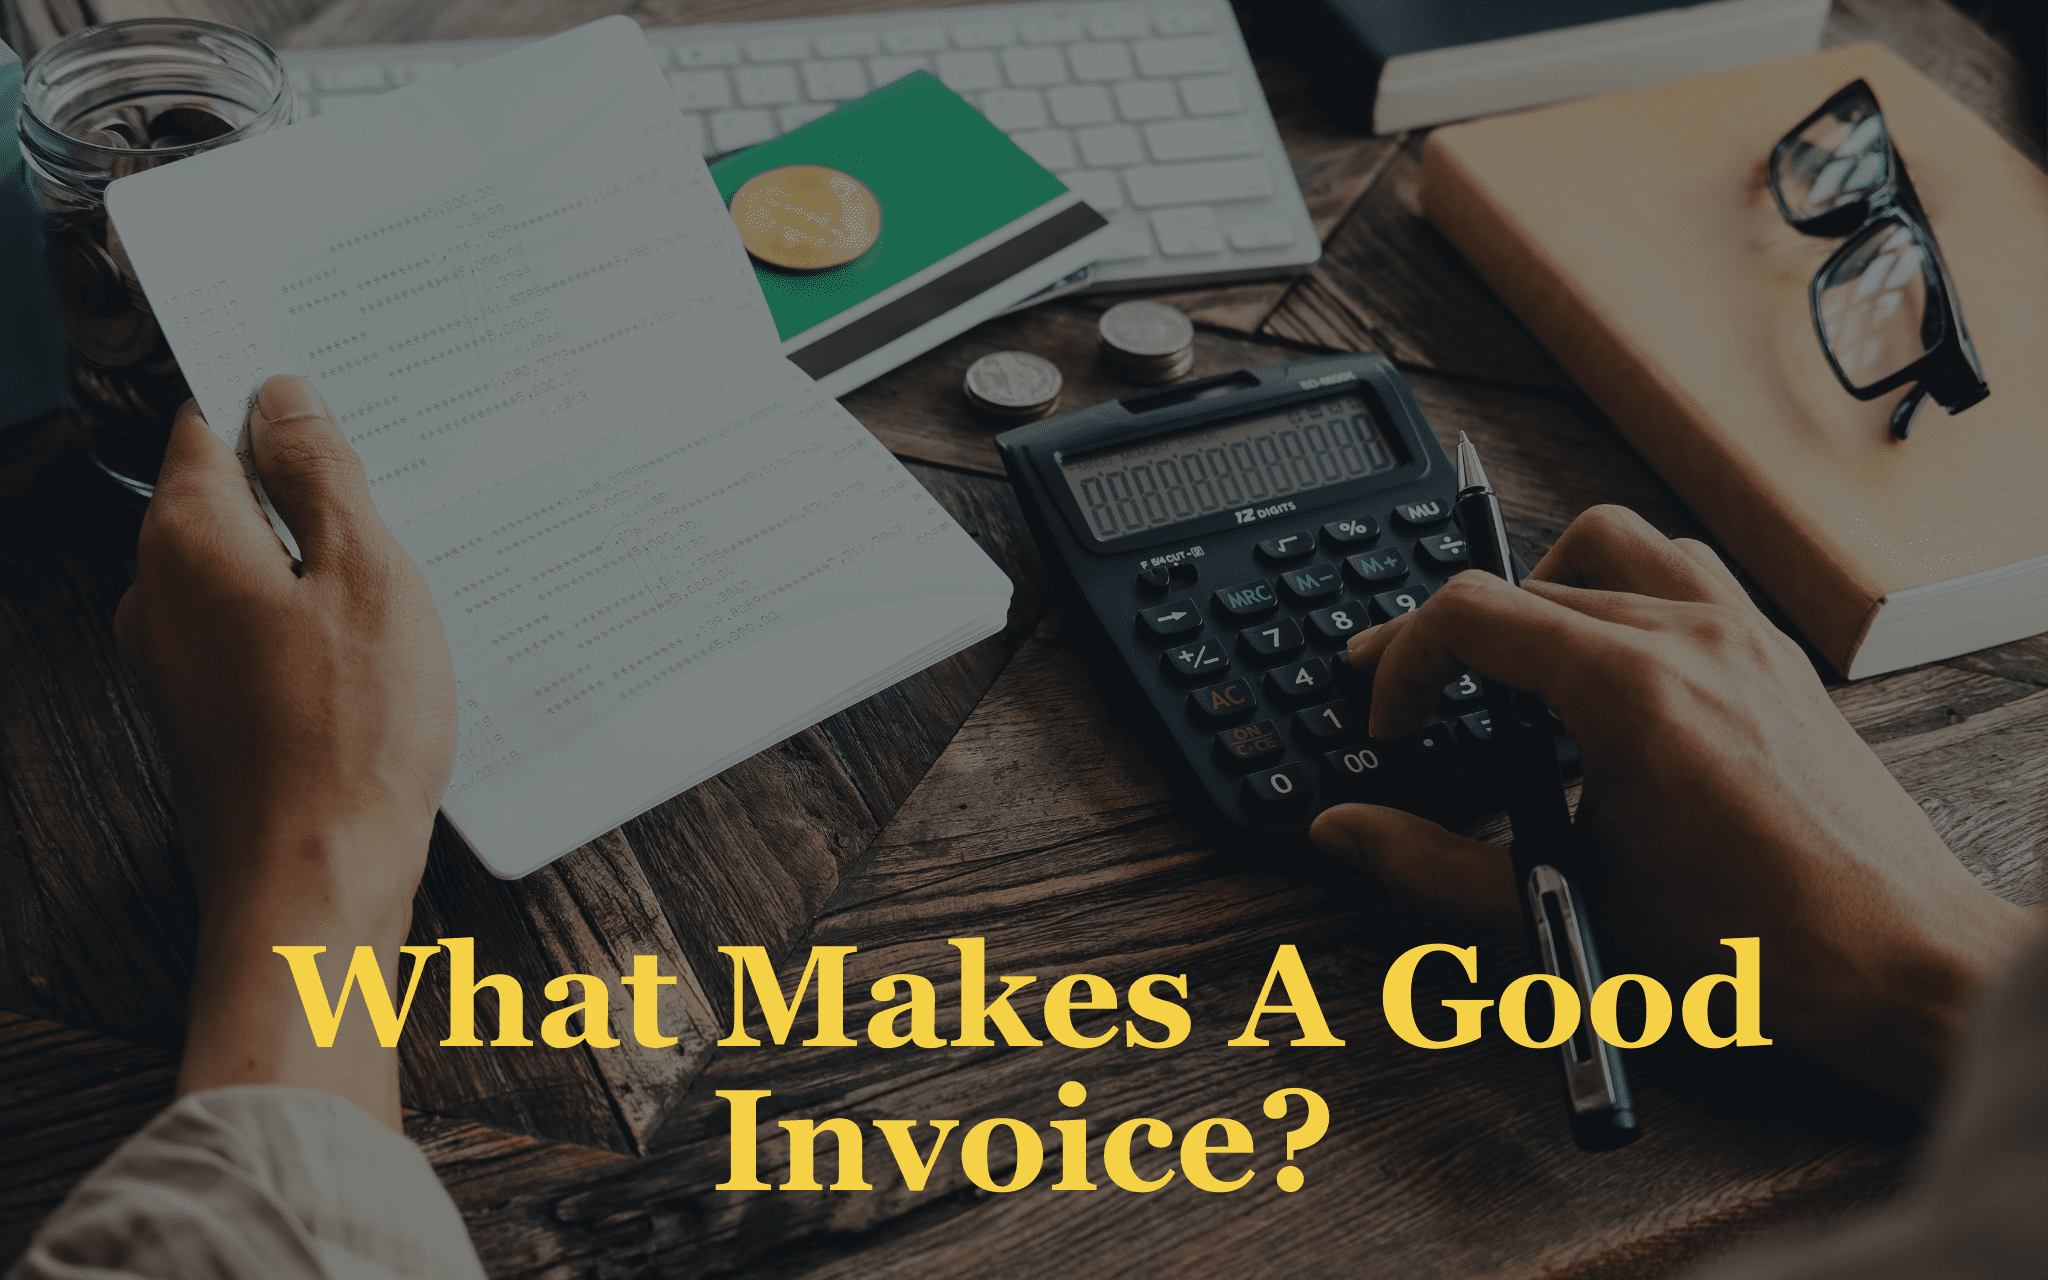 Best Practices for Invoicing Your Customers. What Make a Good Invoice